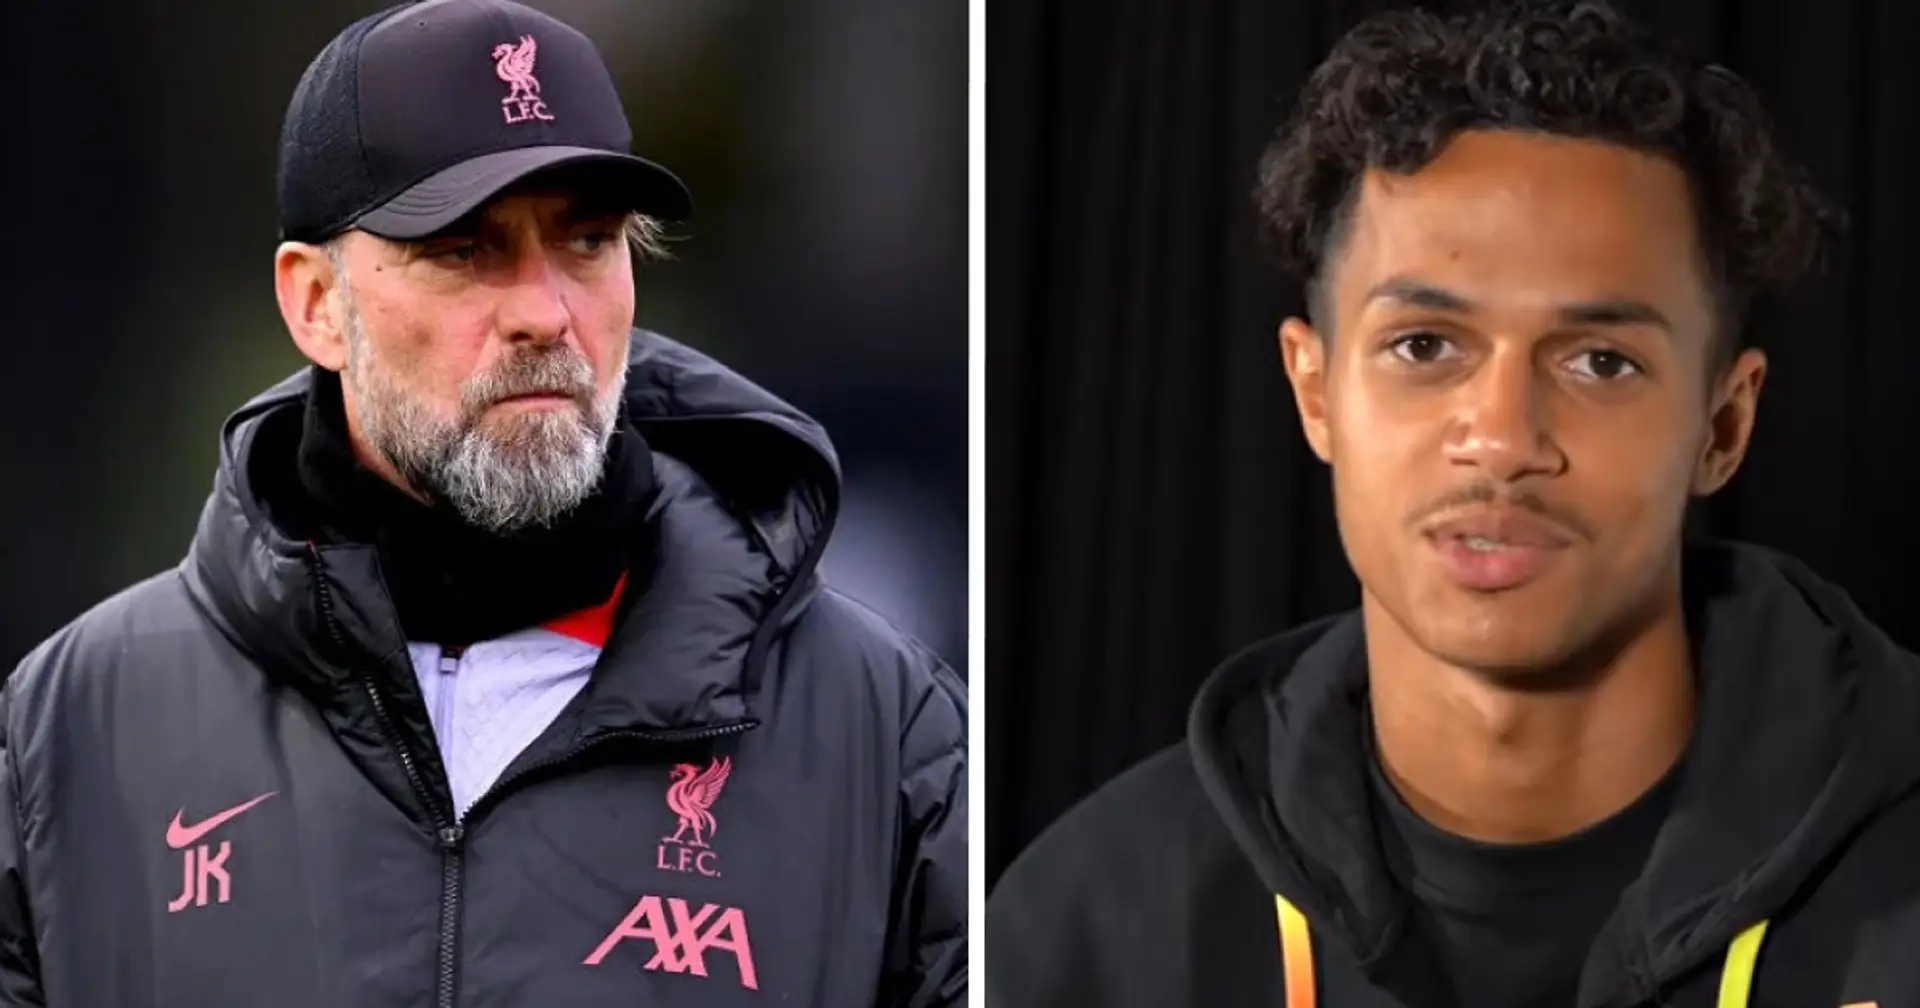 Fabio Carvalho reveals what Klopp told him after he impressed teammates in training